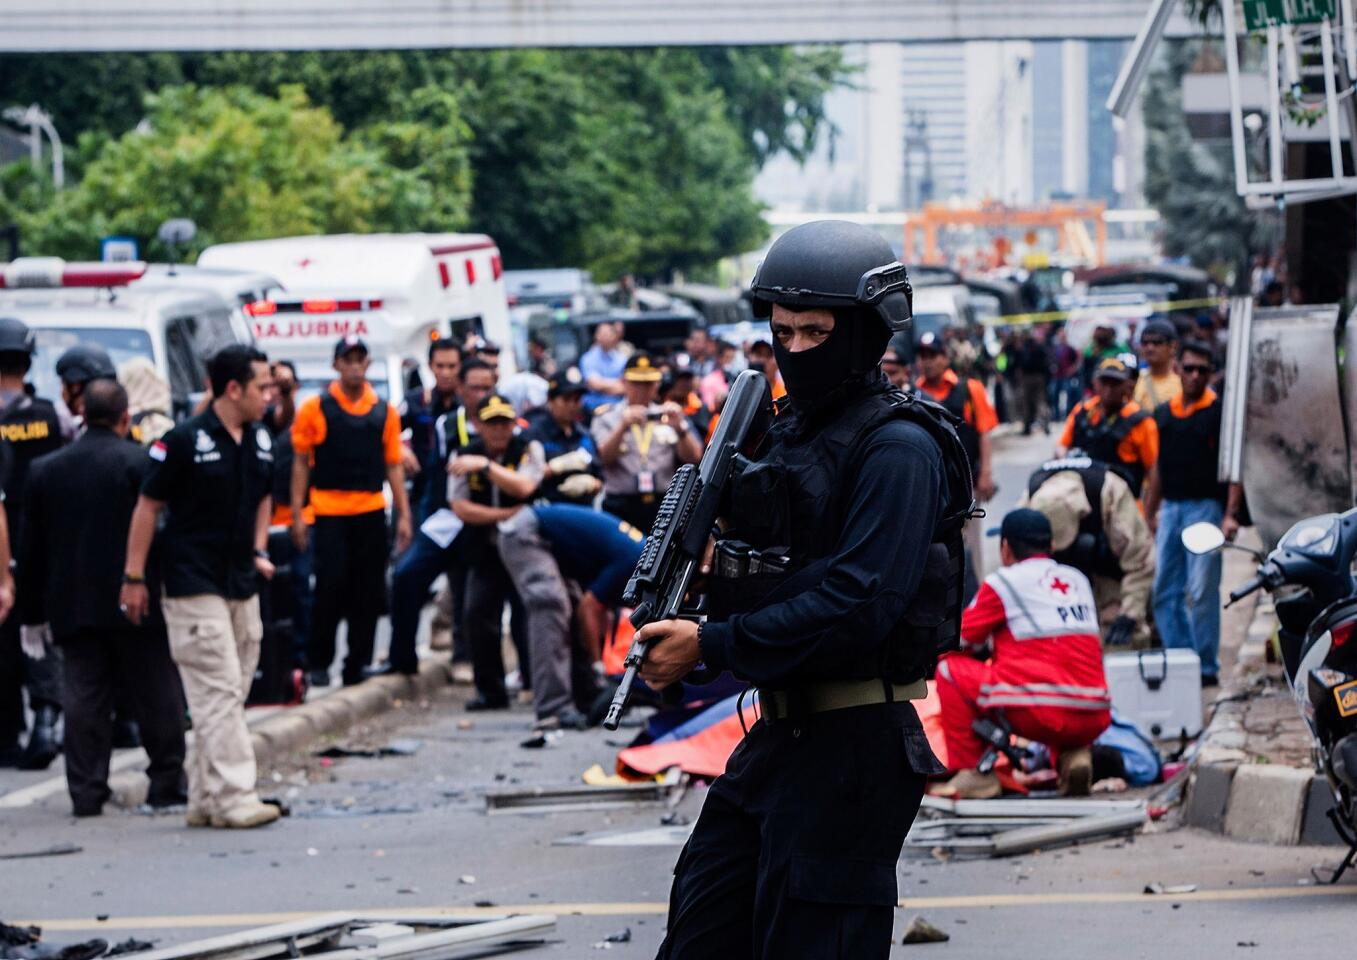 An Indonesian policeman stands guard in front of a blast site at the Indonesia capital Jakarta on January 14, 2016 in Jakarta, Indonesia. Reports of explosions and gunshots in the centre of the Indonesian capital, including outside the United Nations building and in the front of the Sarinah shopping mall, an area with many luxury hotels, embassies and offices.